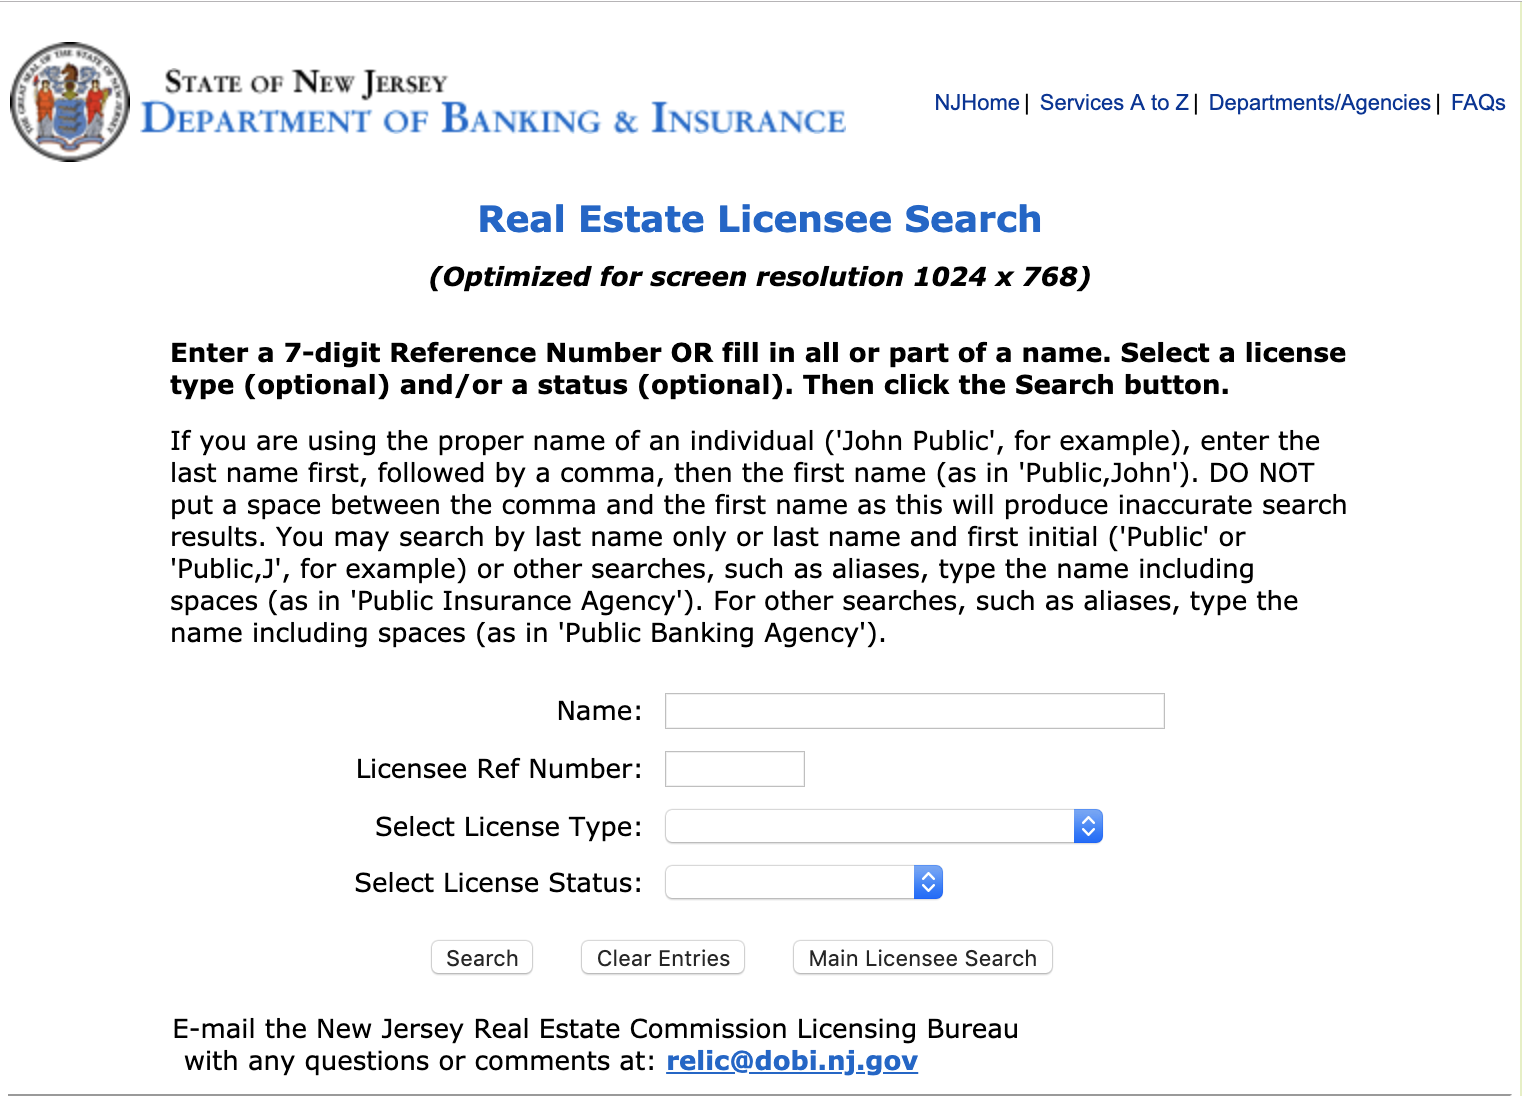 How to Get Your Real Estate License From a Montana Real Estate School
